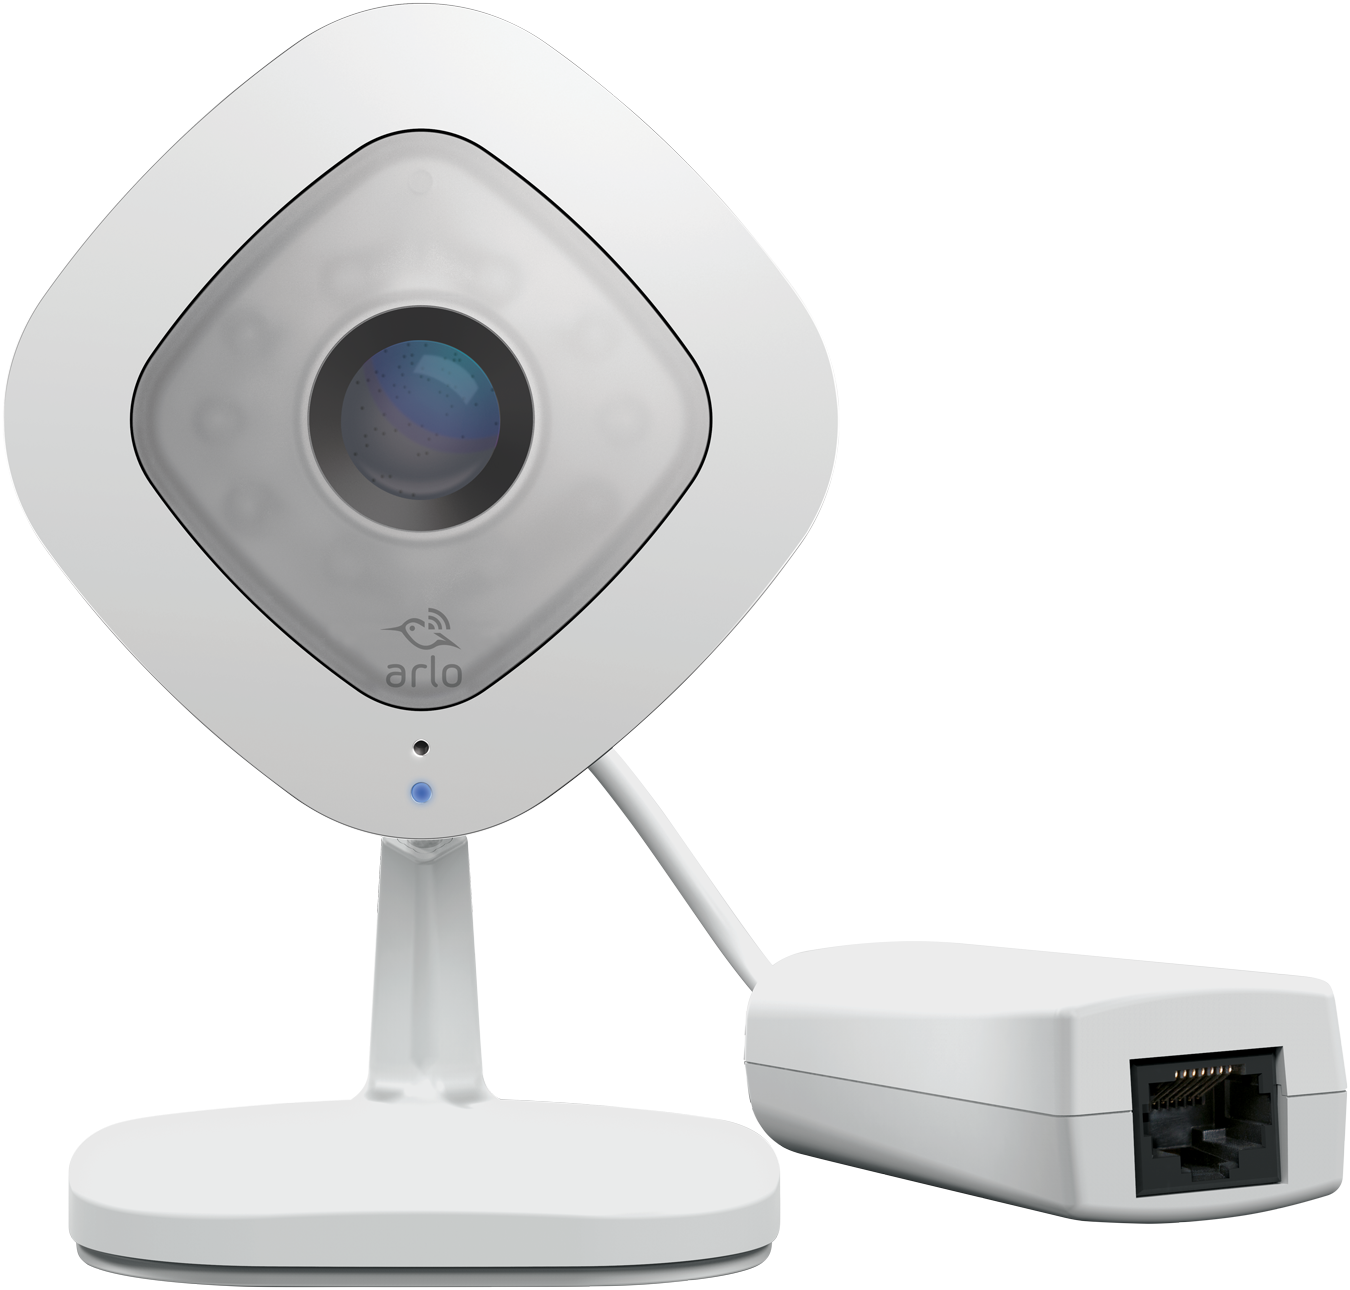 ethernet wired security cameras